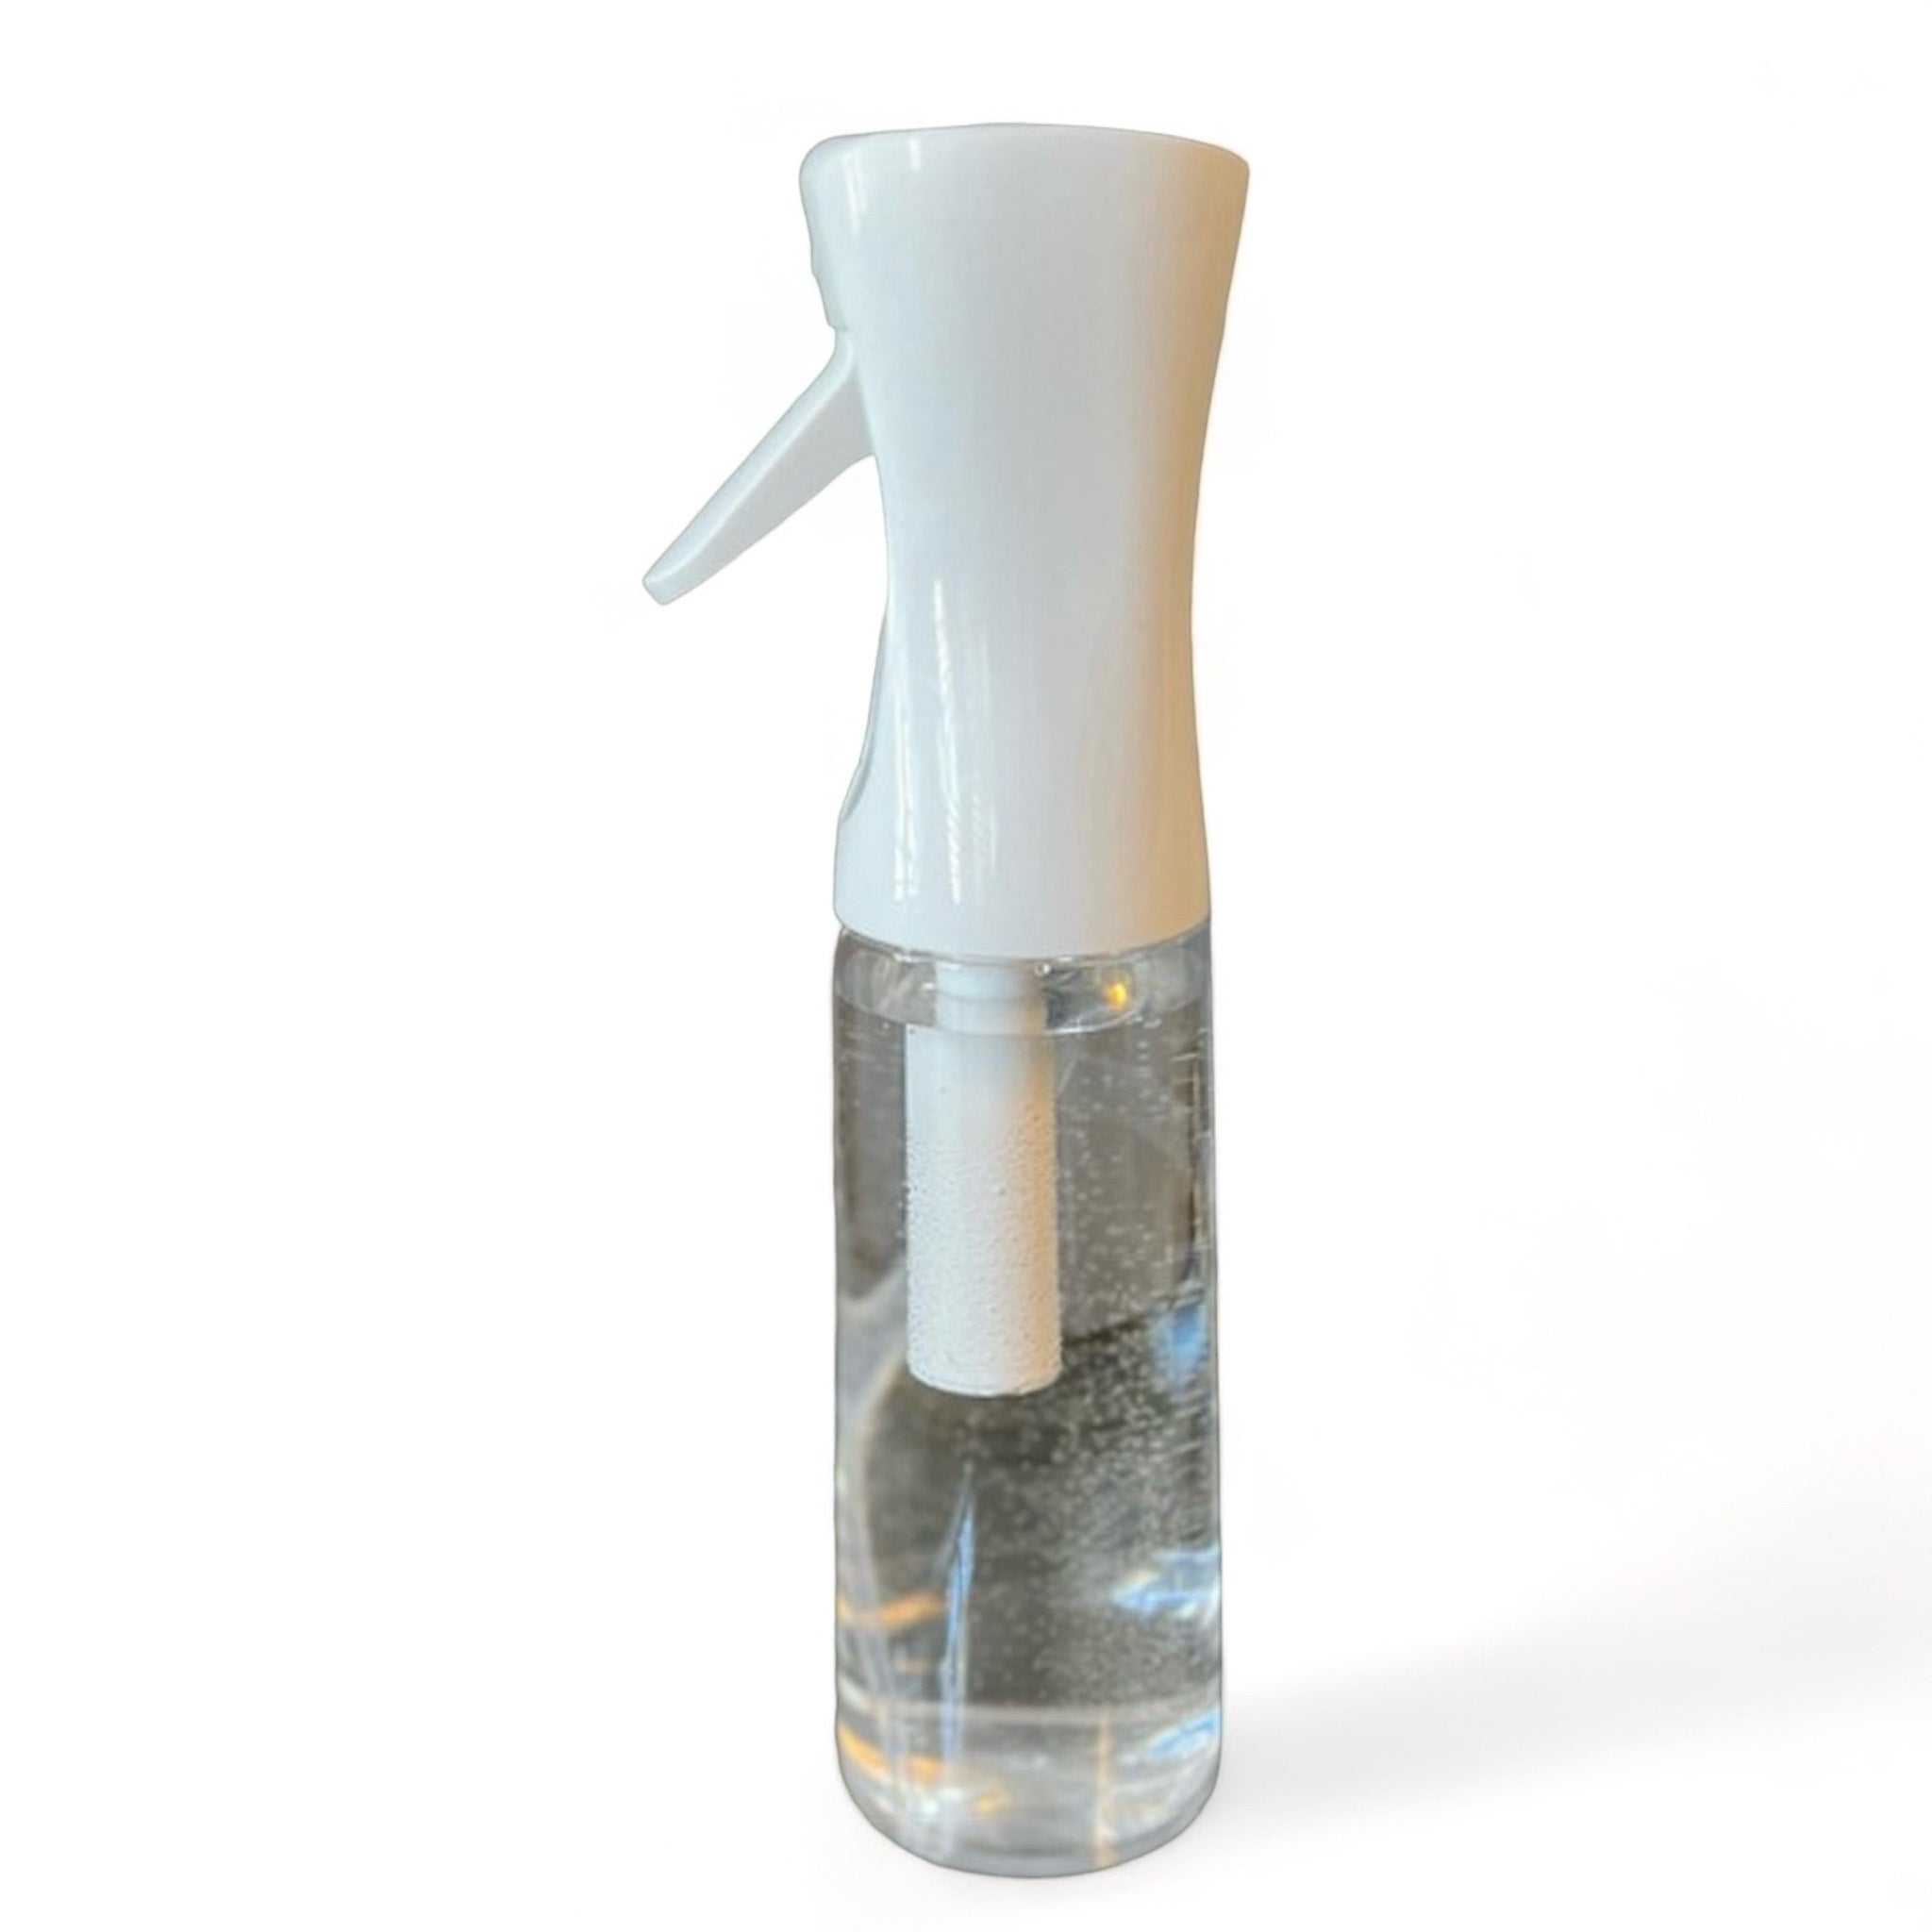 A side view of a 10 ounce continuous spray fine mist spray bottle is against a white background.